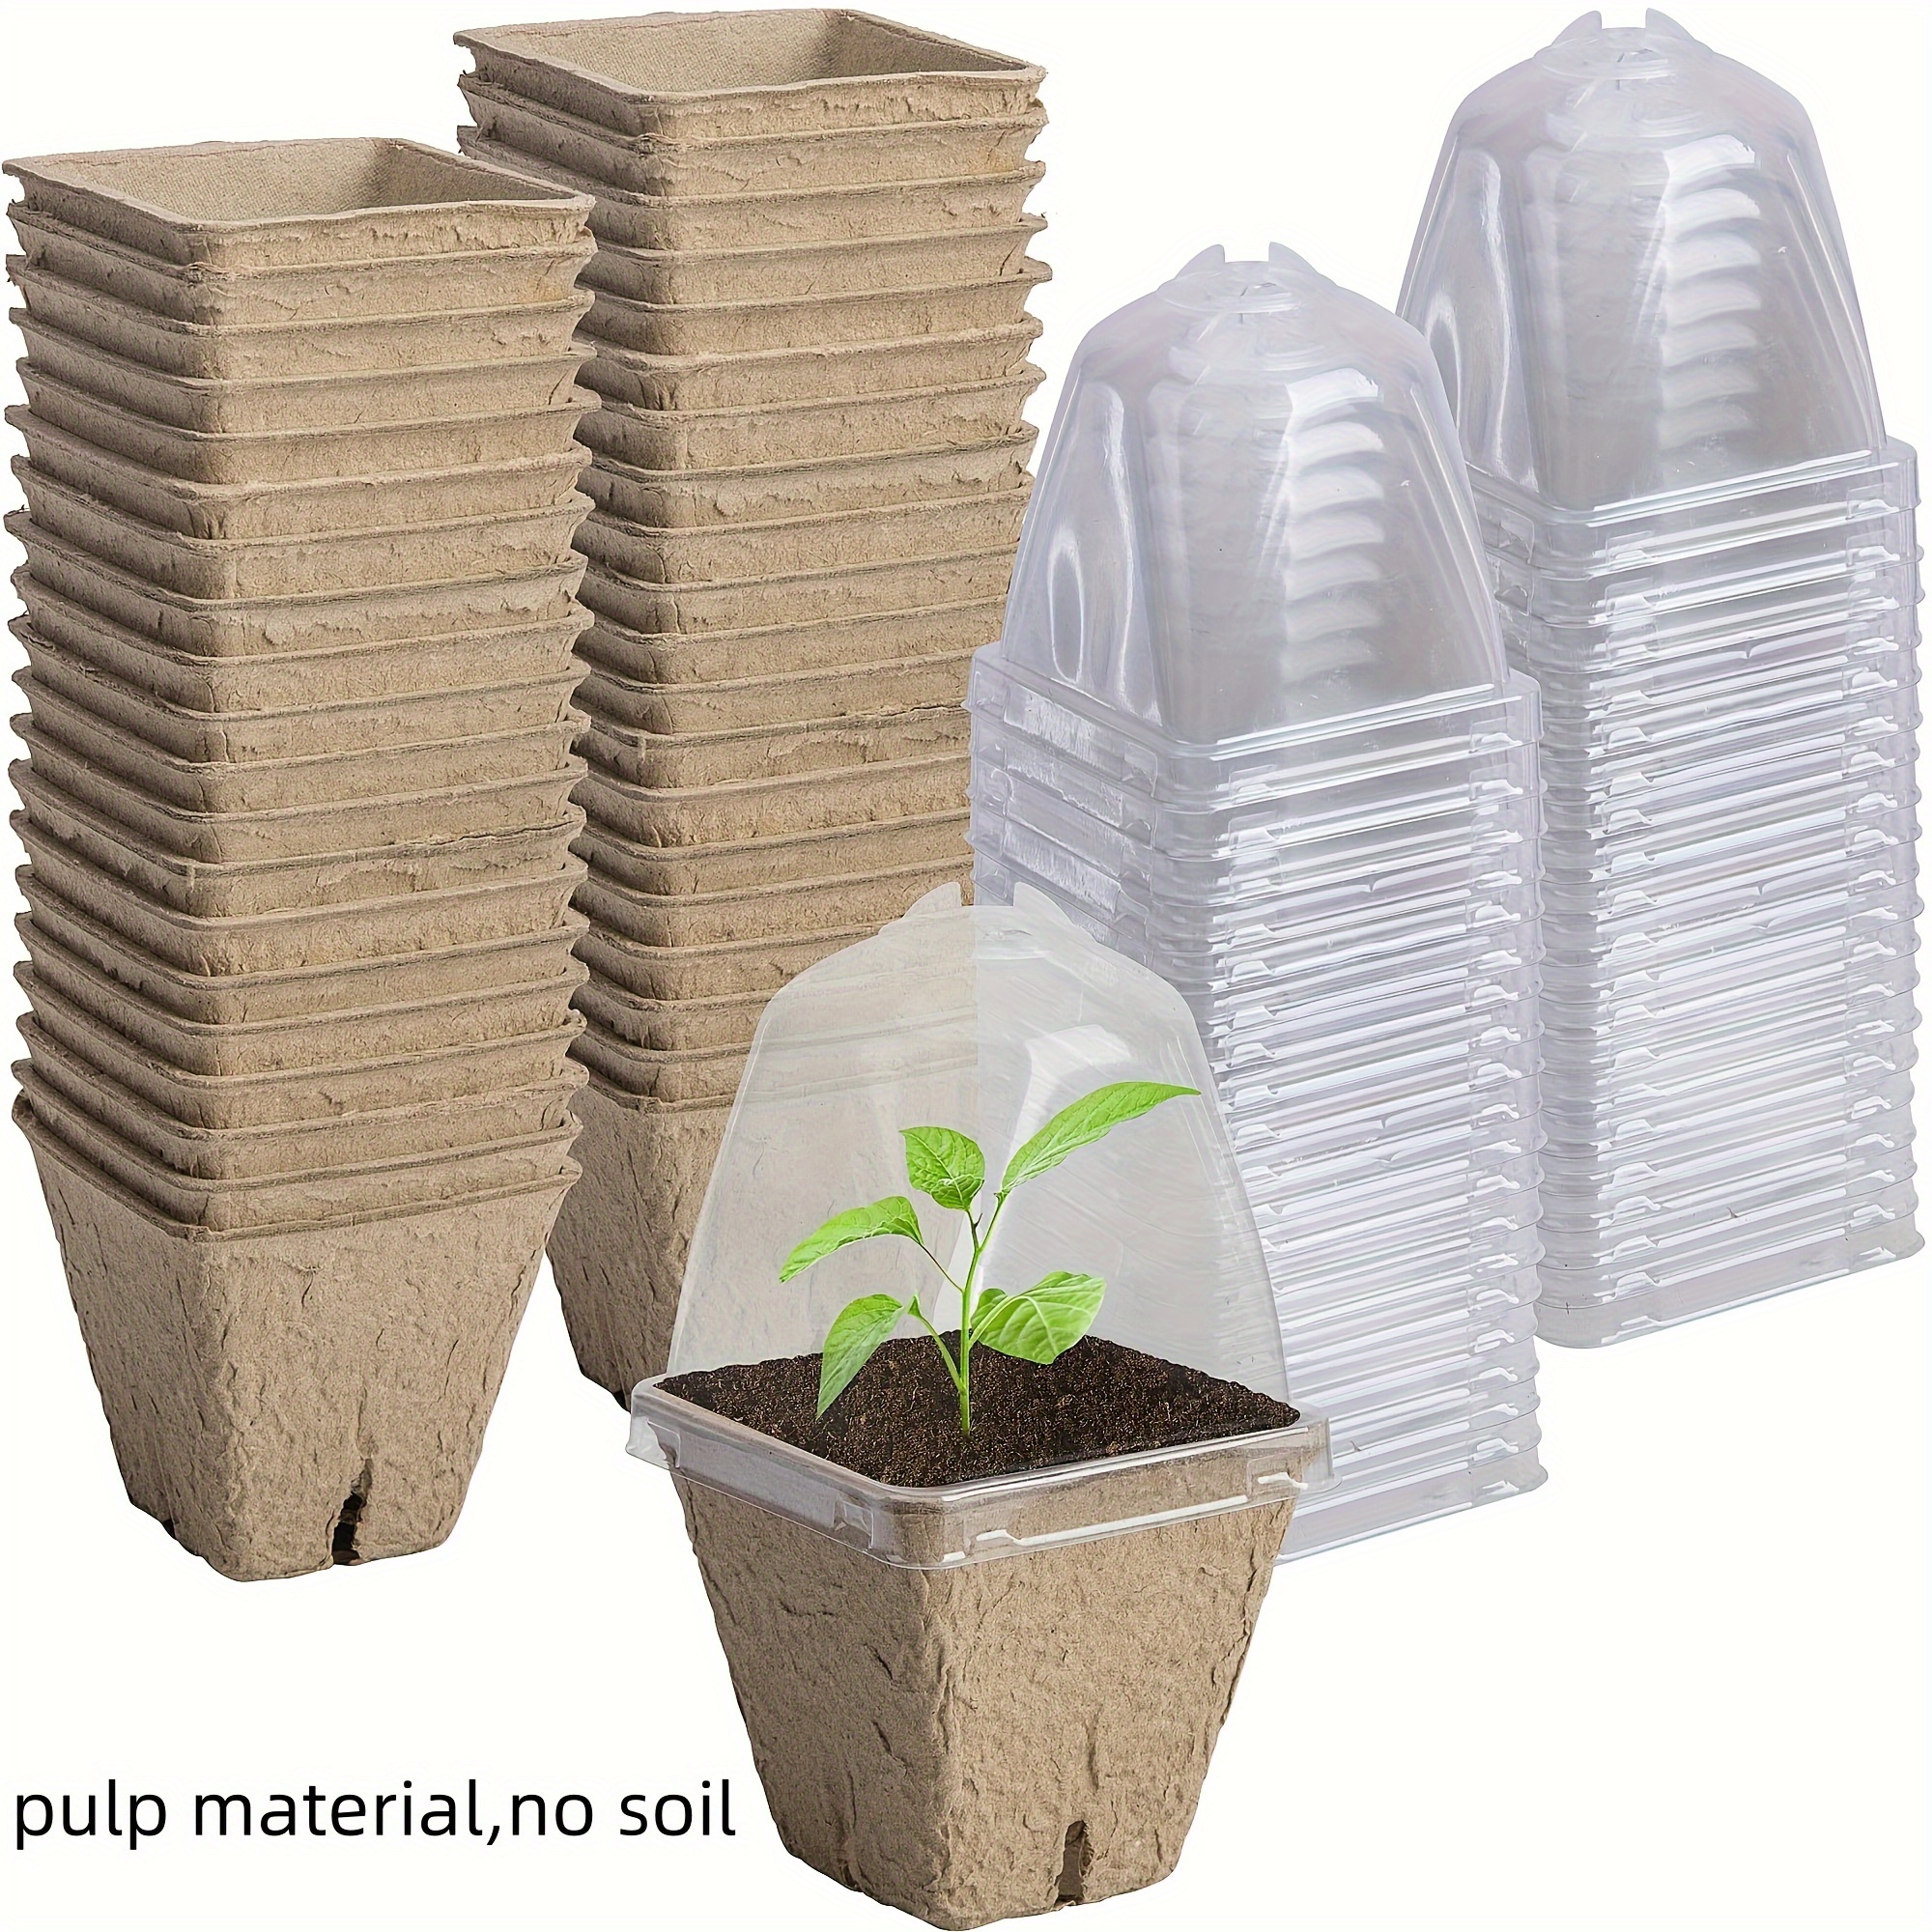 

40 Pcs Seeding Starter Pots For Planting- 3.1 Inch Square Biodegradable Nursery Pots With Humidity Dome- Peat Pots For Seedlings Garden Vegetable Flower Germination